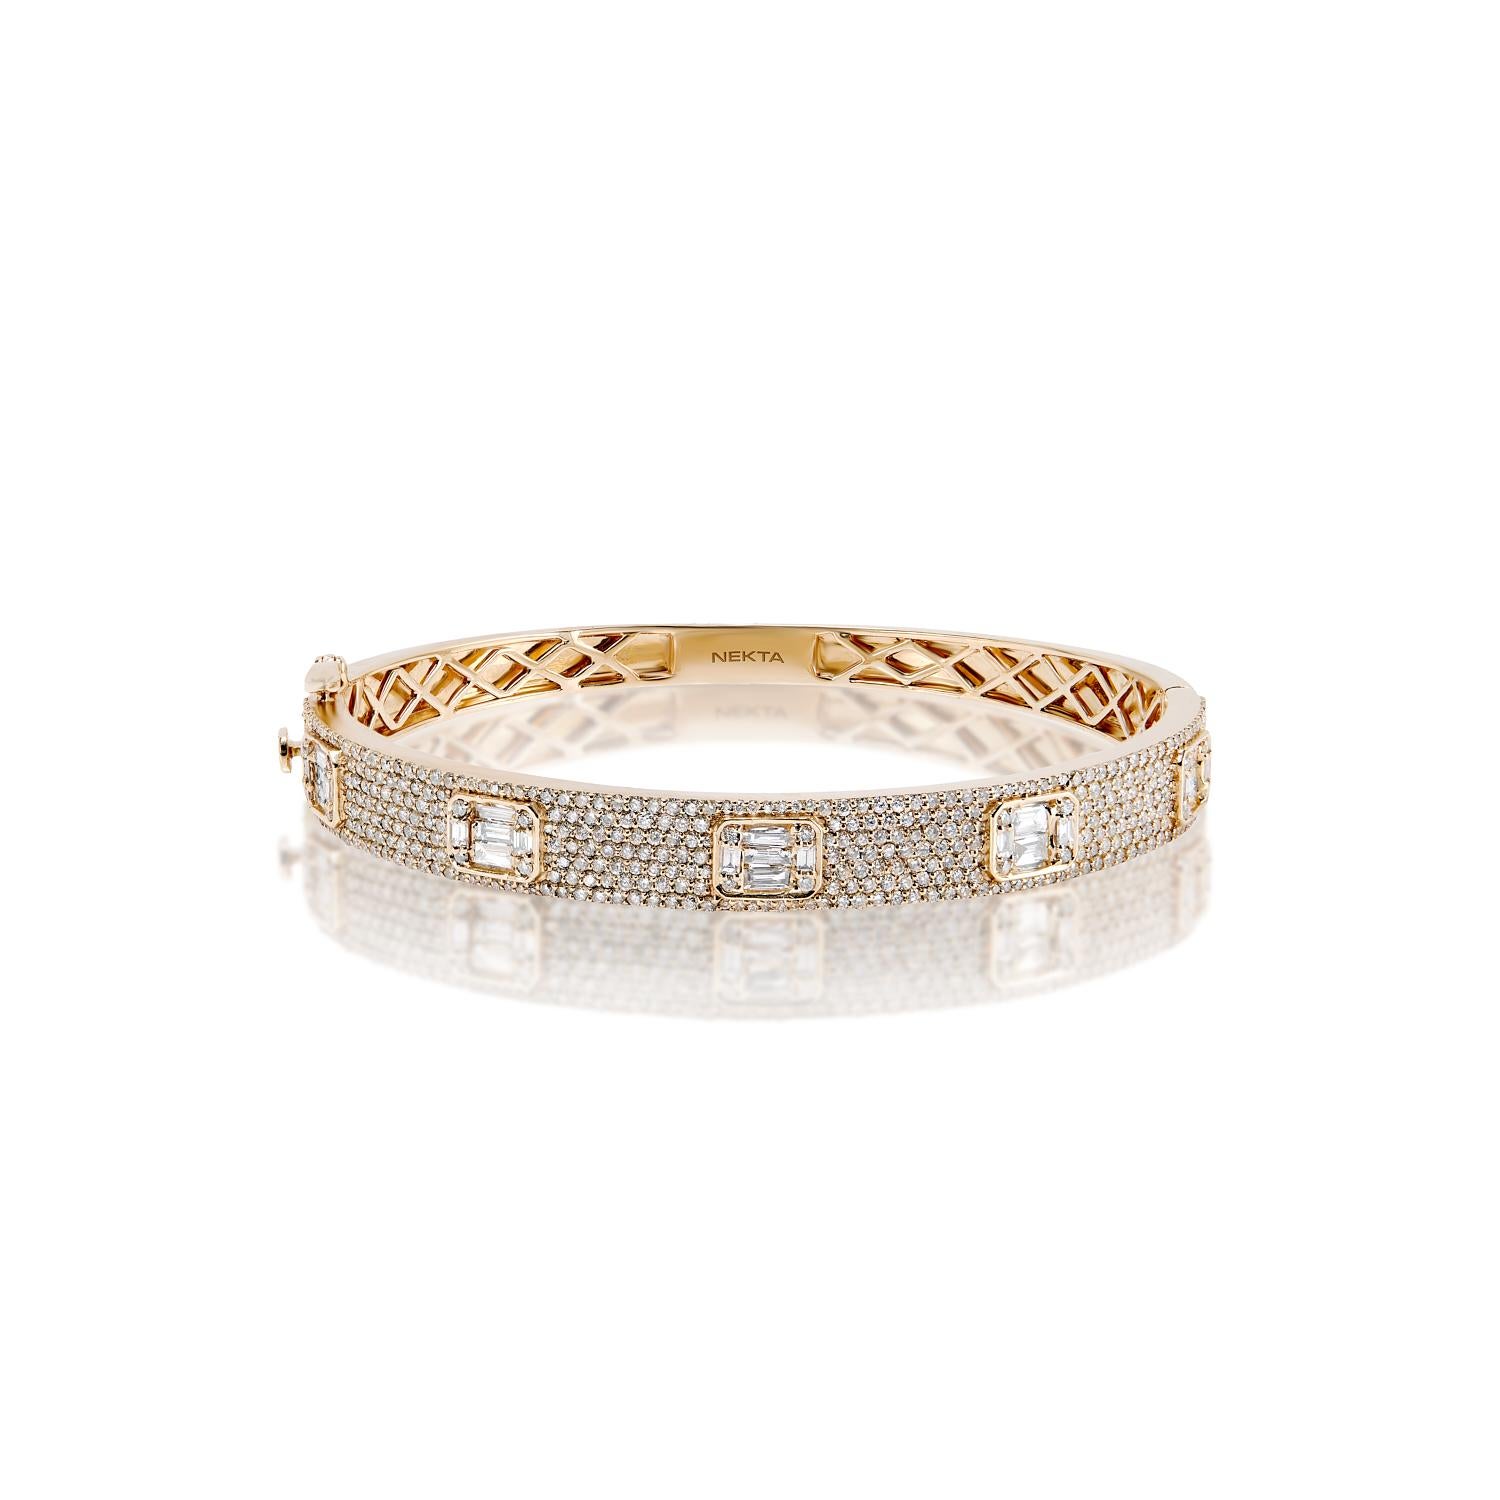 The RAMONA 3 Carat Diamond Bangle Bracelet features COMBINE MIX SHAPE DIAMONDS brilliants weighing a total of approximately 3.30 carats, set in 14K Rose Gold.

Style:
Diamonds
Diamond Size: 3.30 Carats
Diamond Shape: Combine Mix Shape
Metal: 14k